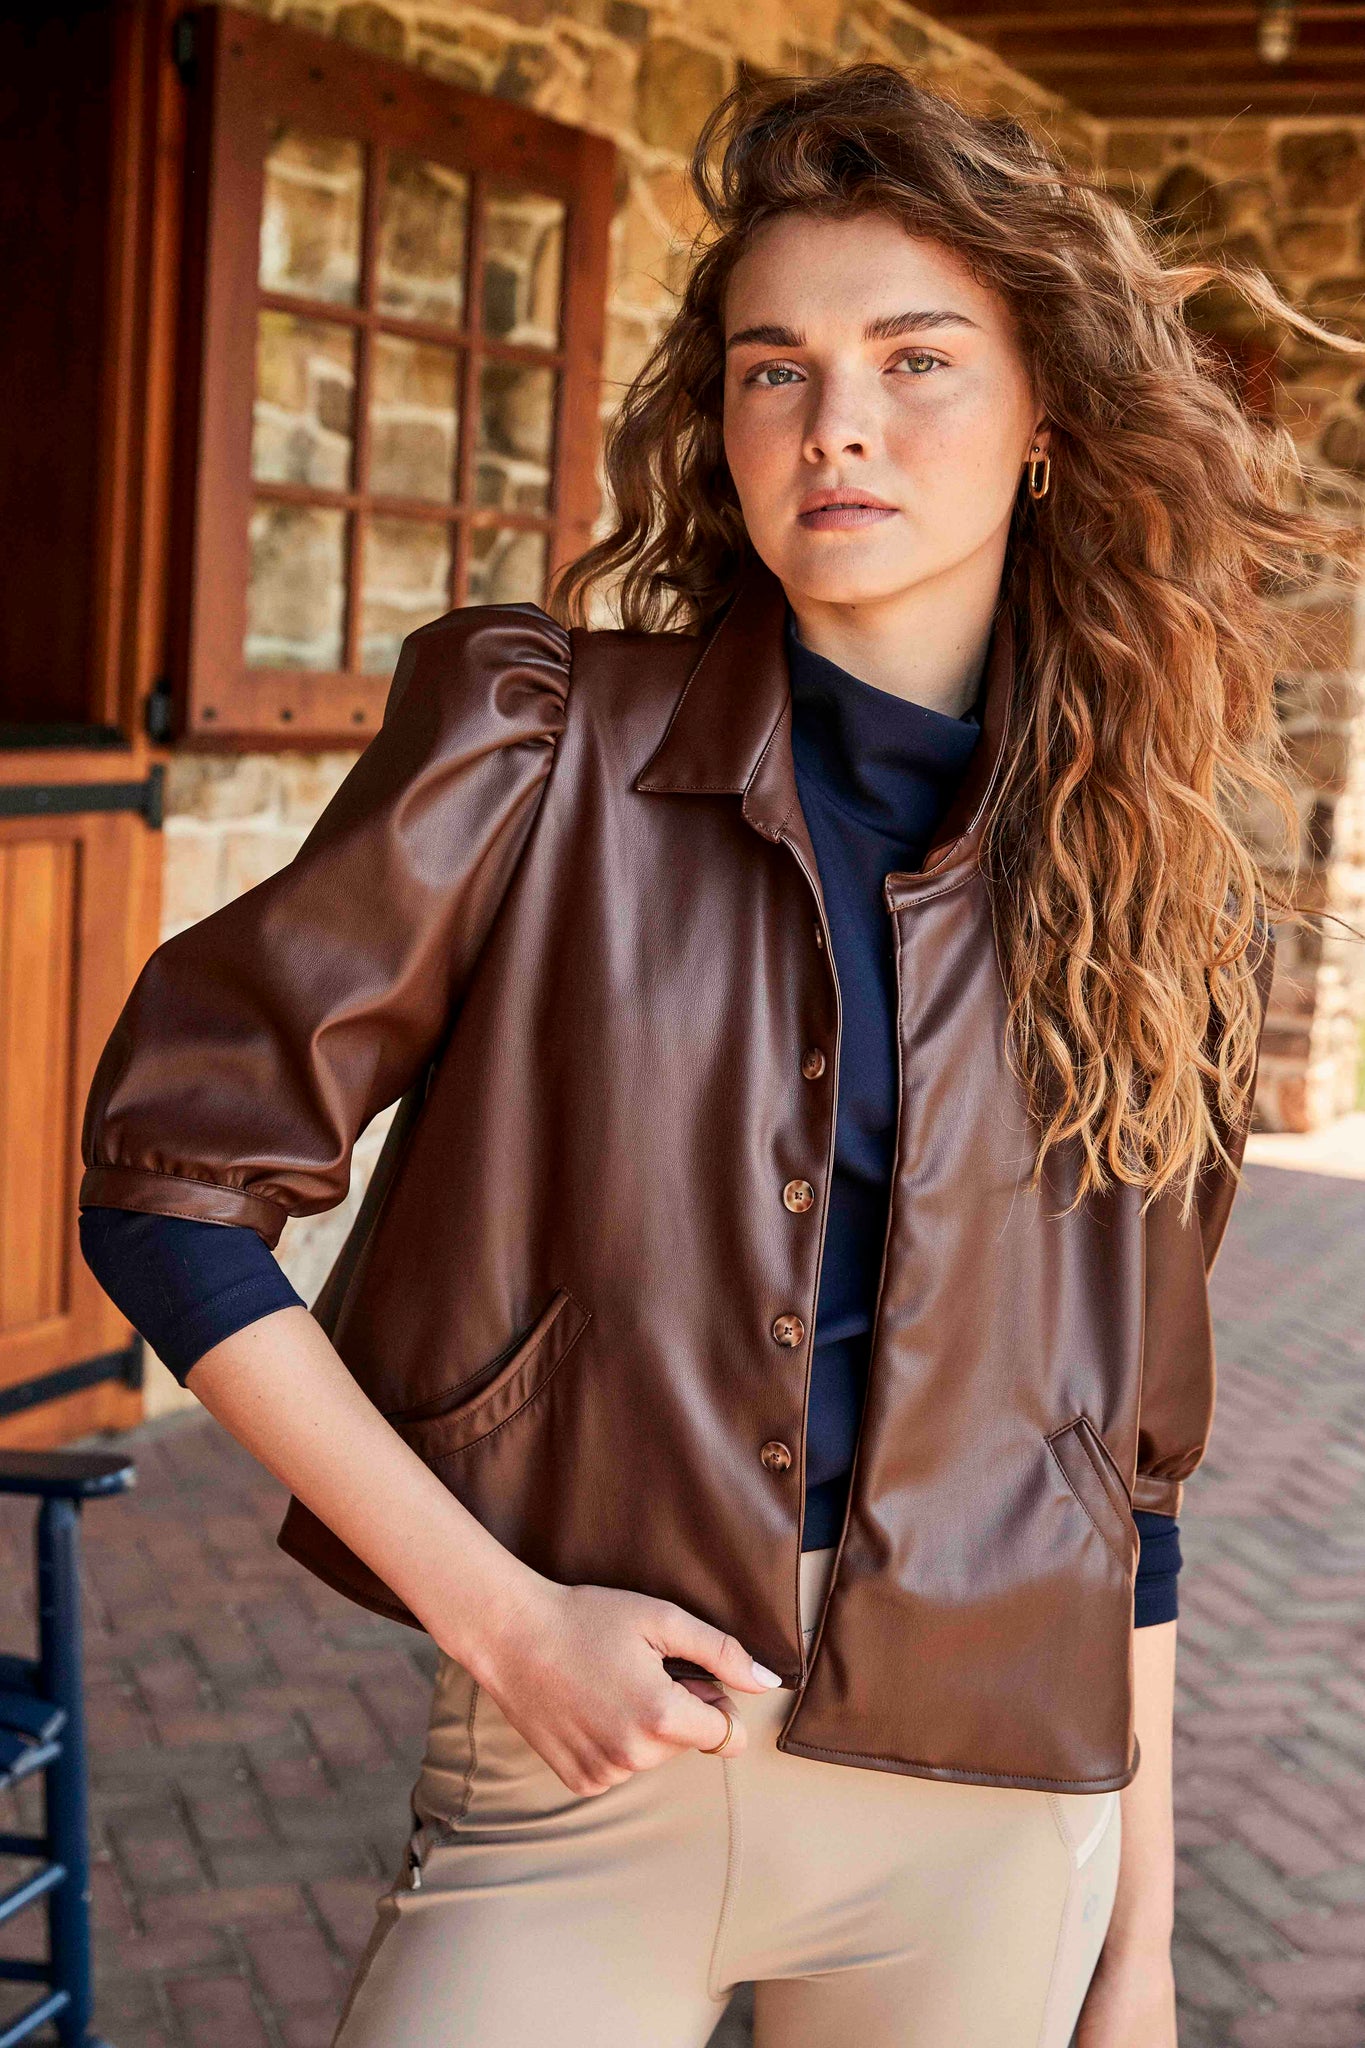 Colby Jacket-Faux Leather-Chicory by Cartolina